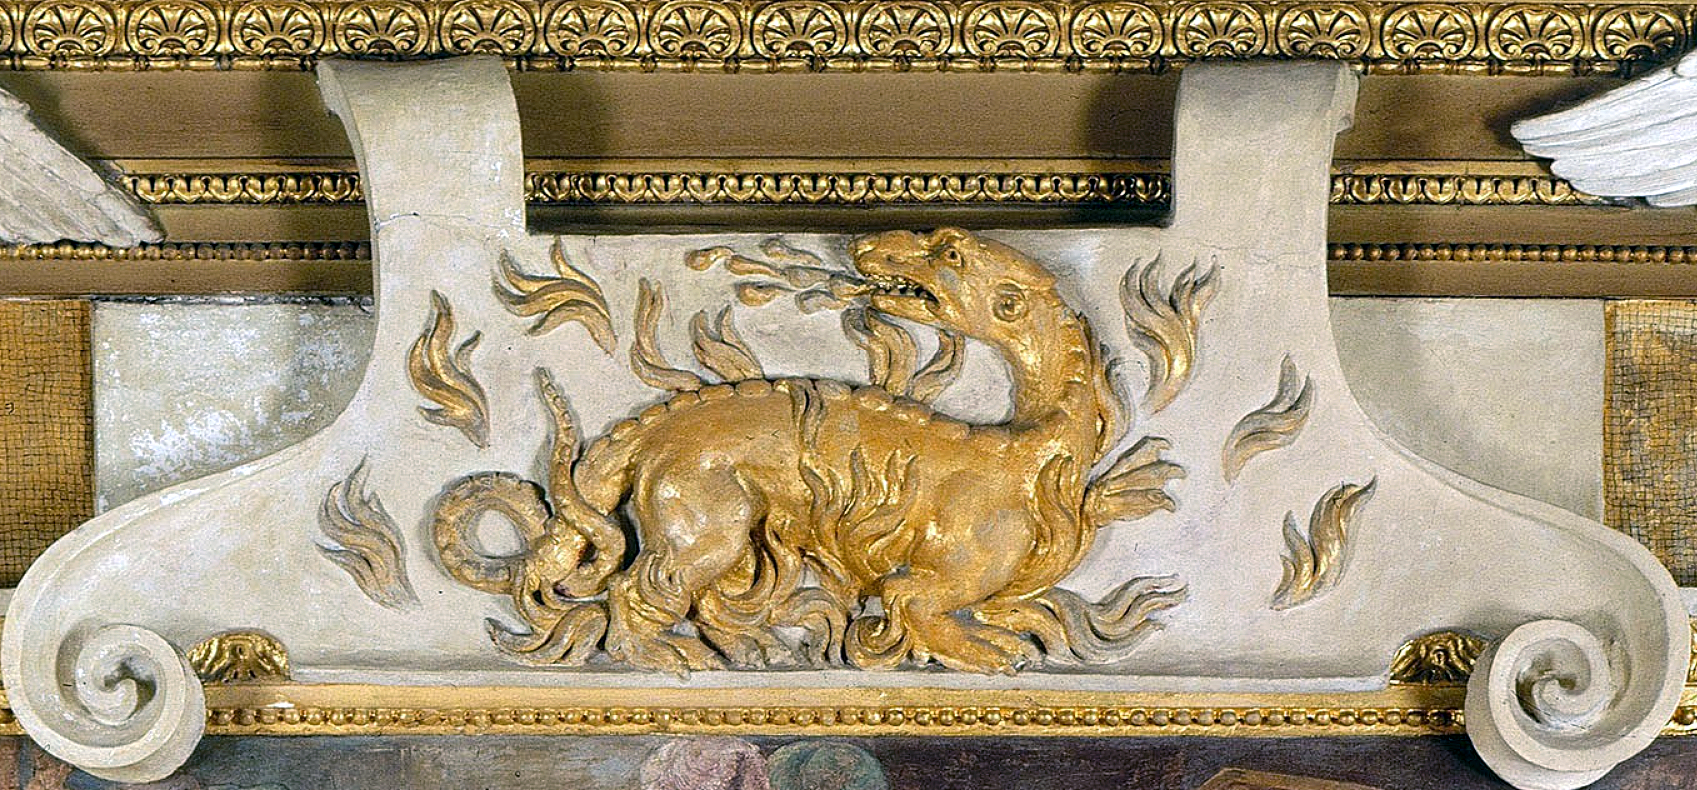 Workshop of Rosso Fiorentino, detail of salamander, Gallery of Francis I, Château de Fontainebleau, 1528-1540 (photo: cea +, CC BY 2.0)